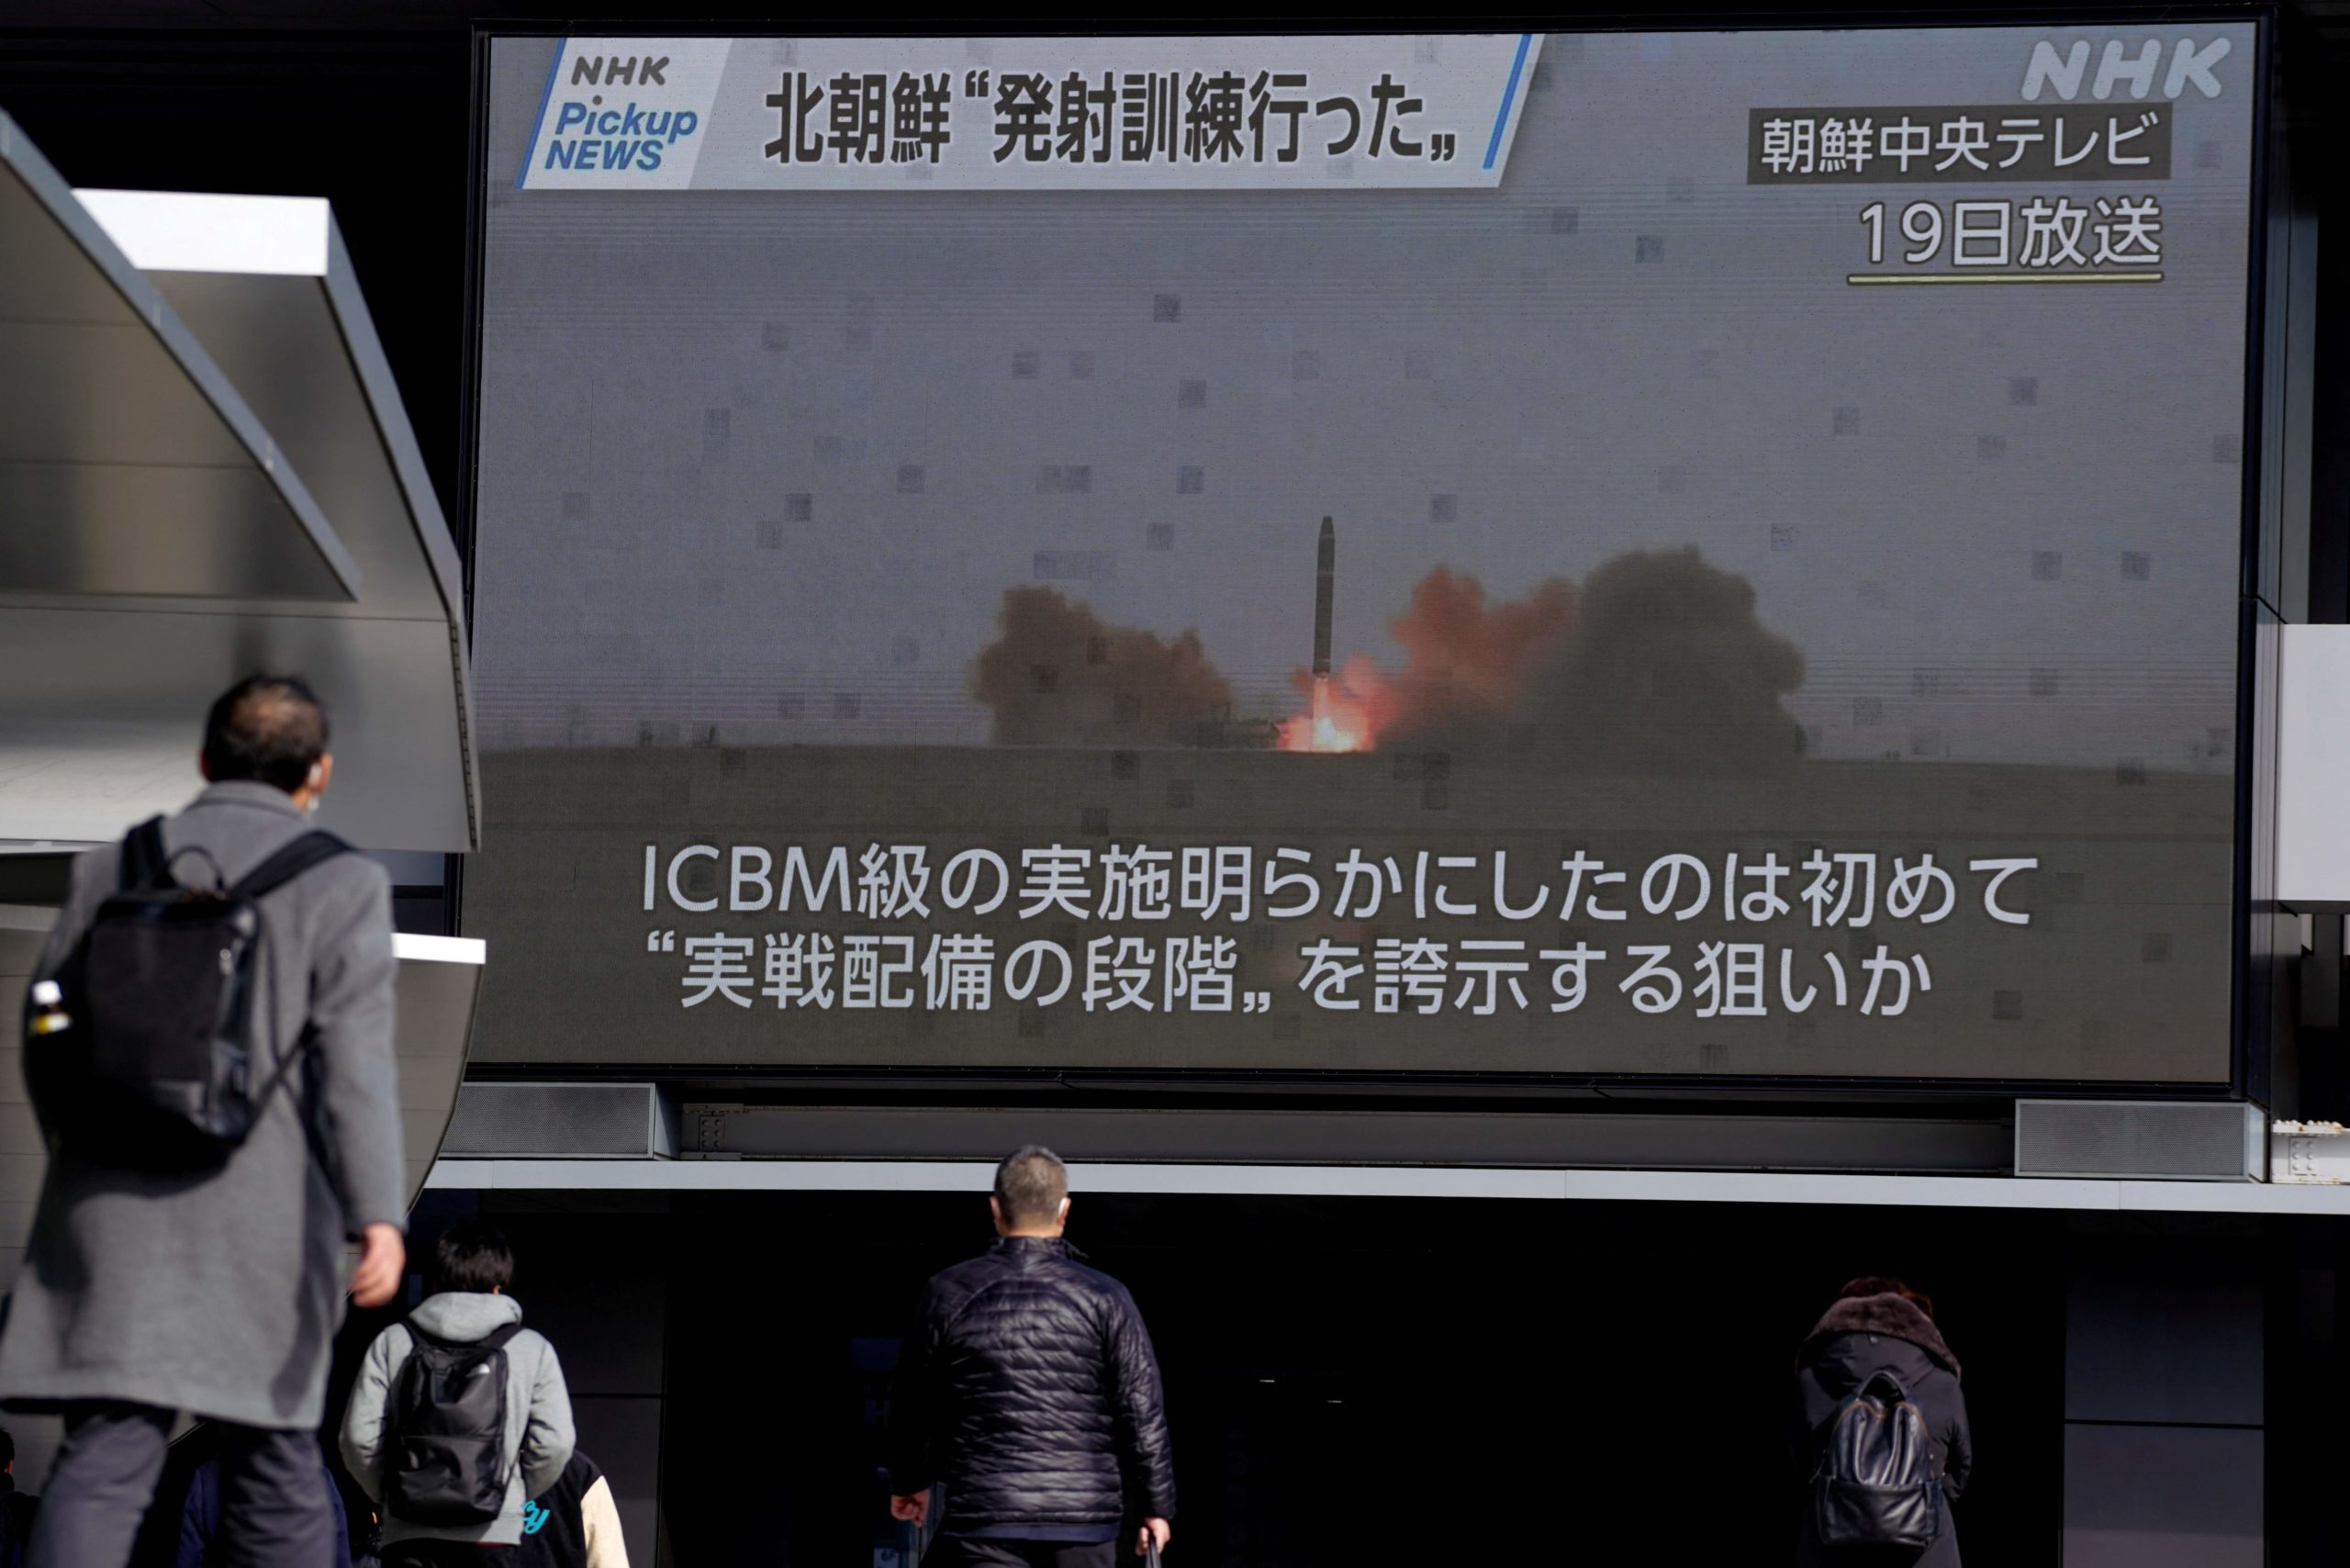 Pedestrians walk past a screen in Tokyo on February 20, 2023, displaying North Korea's missile launch footage broadcasted by Korean Central Television on February 19